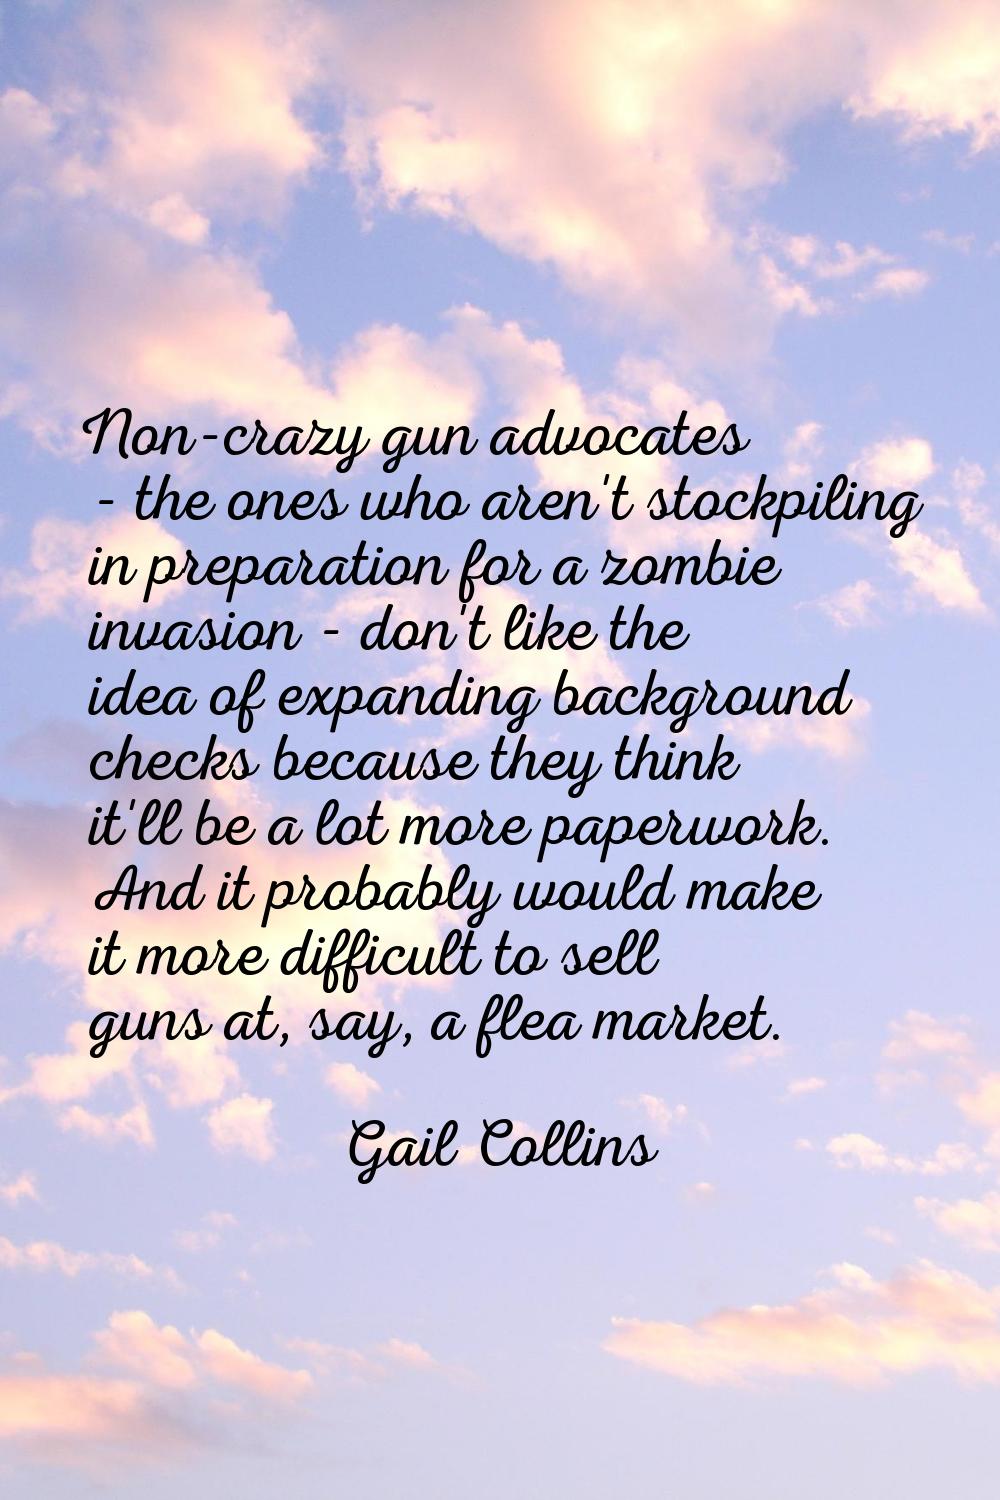 Non-crazy gun advocates - the ones who aren't stockpiling in preparation for a zombie invasion - do